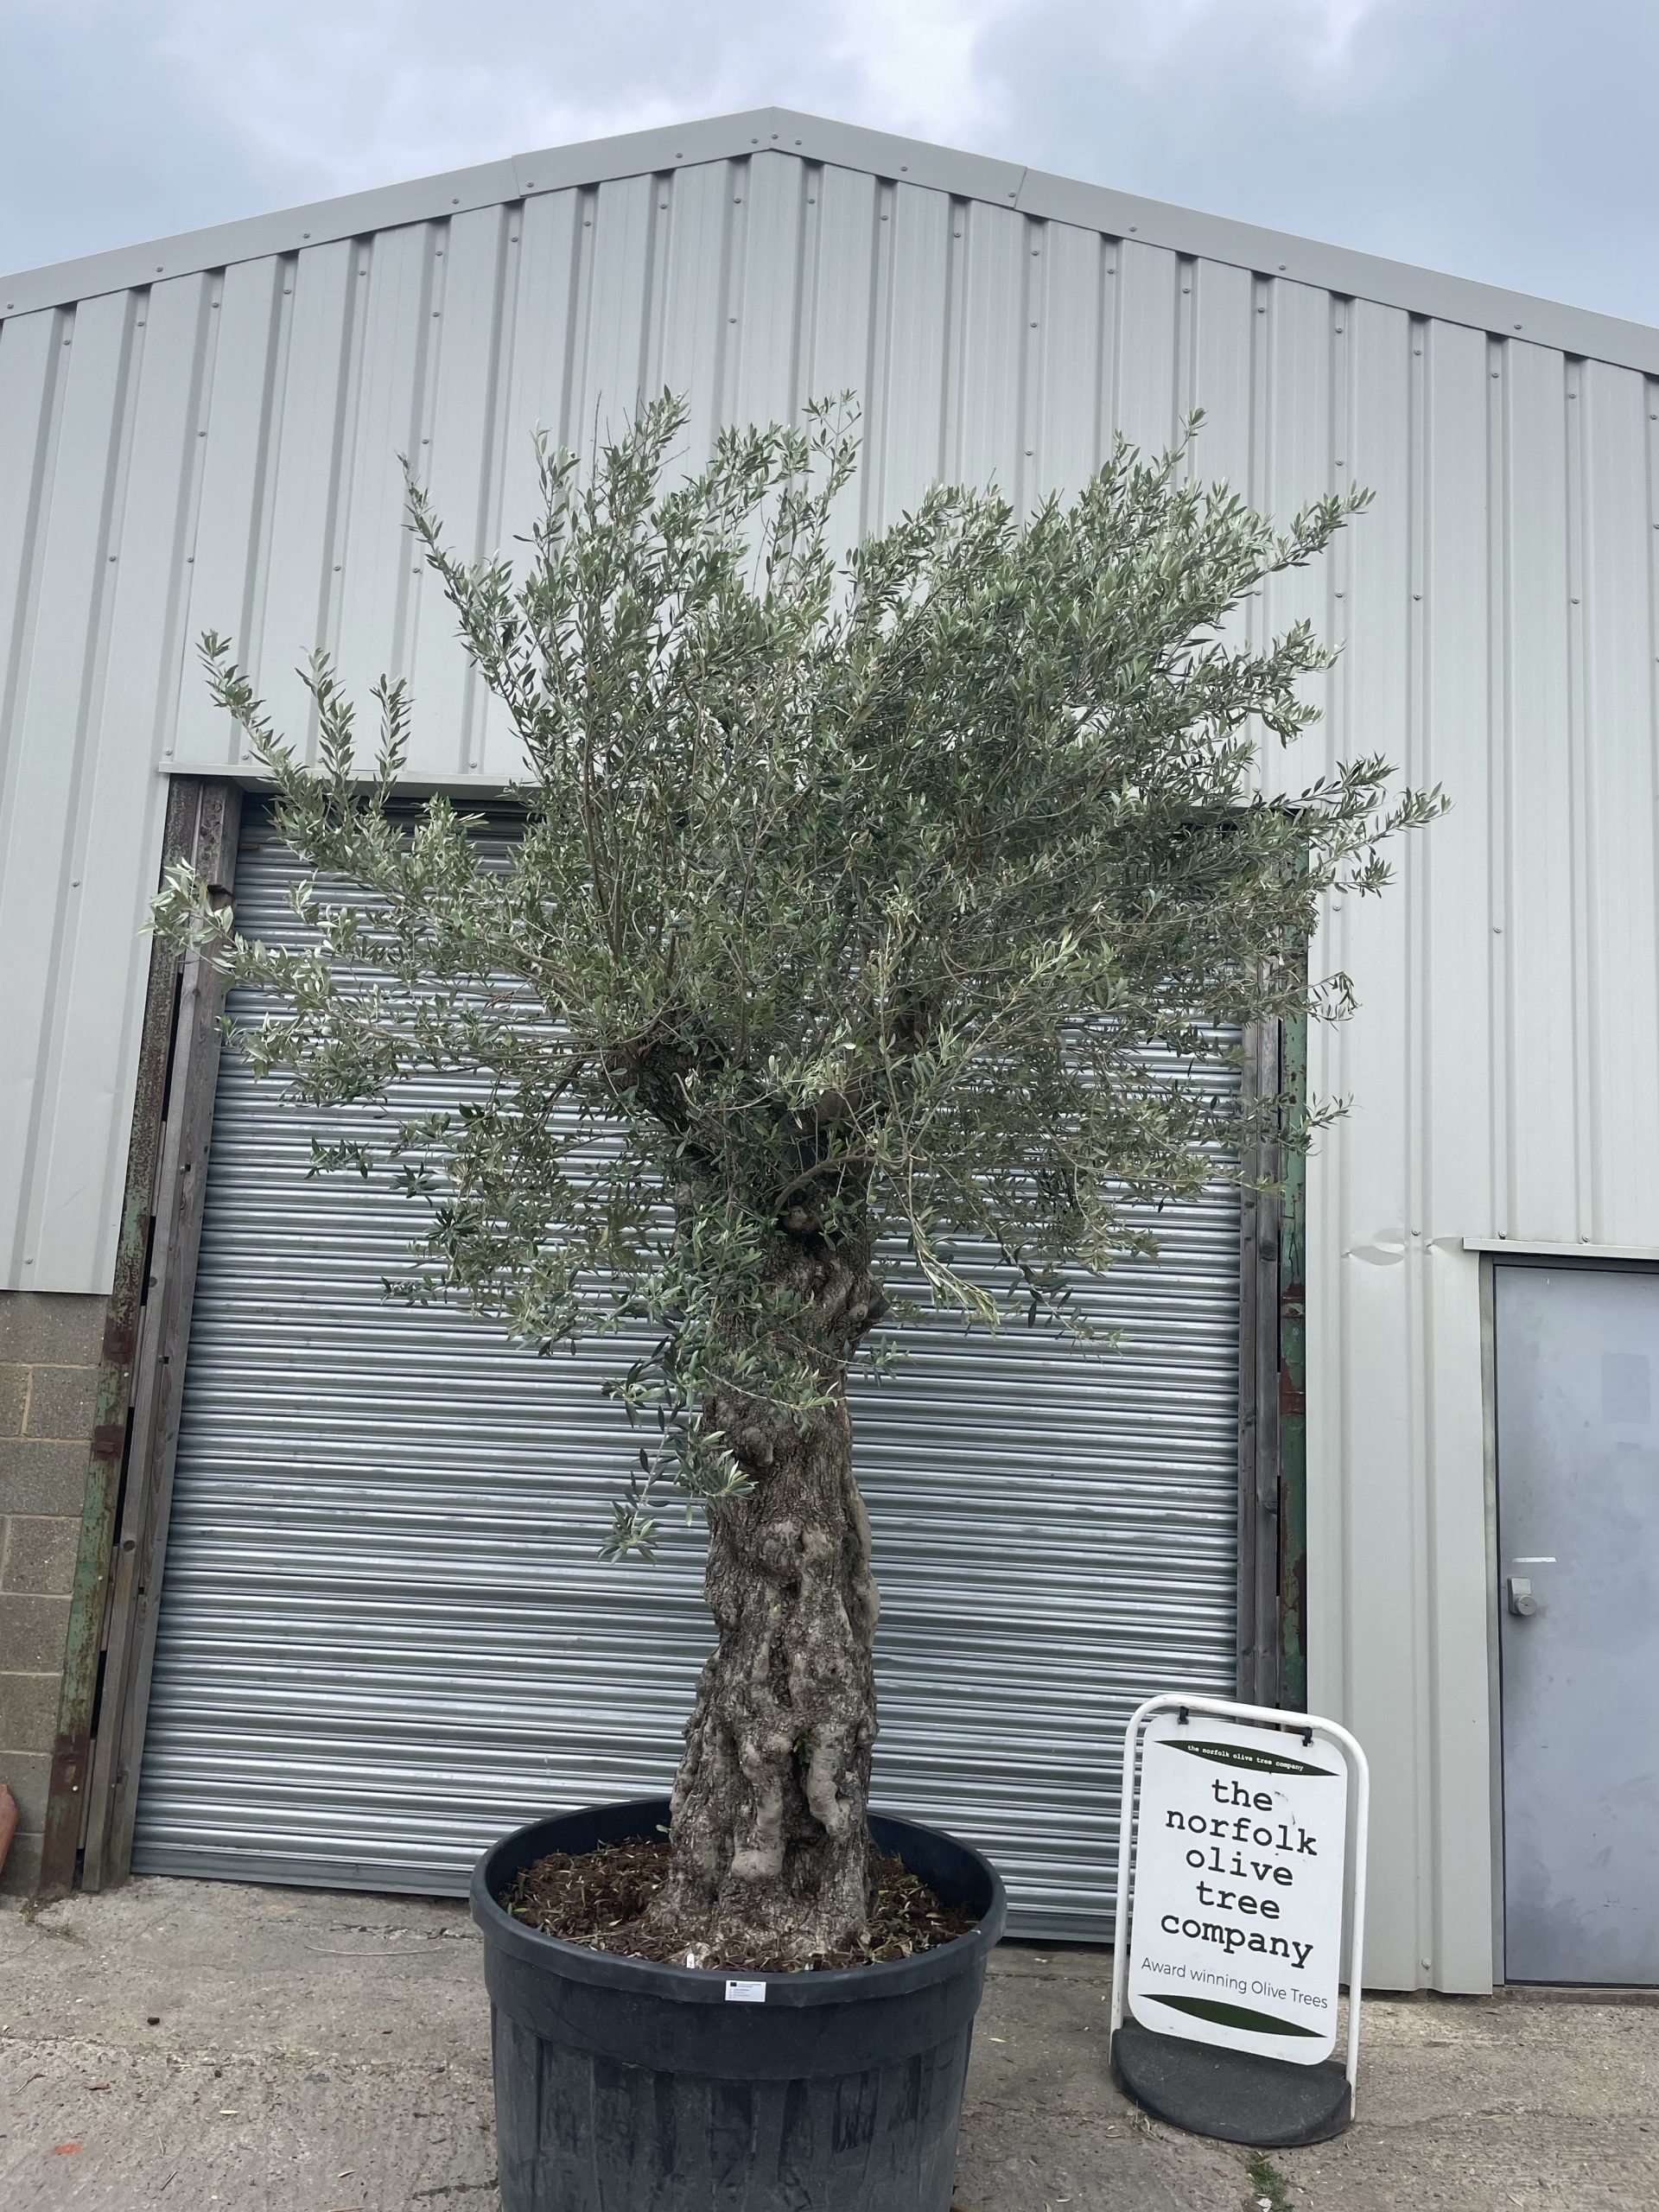 Ancient Olive tree extra large - The Norfolk Olive Tree Company